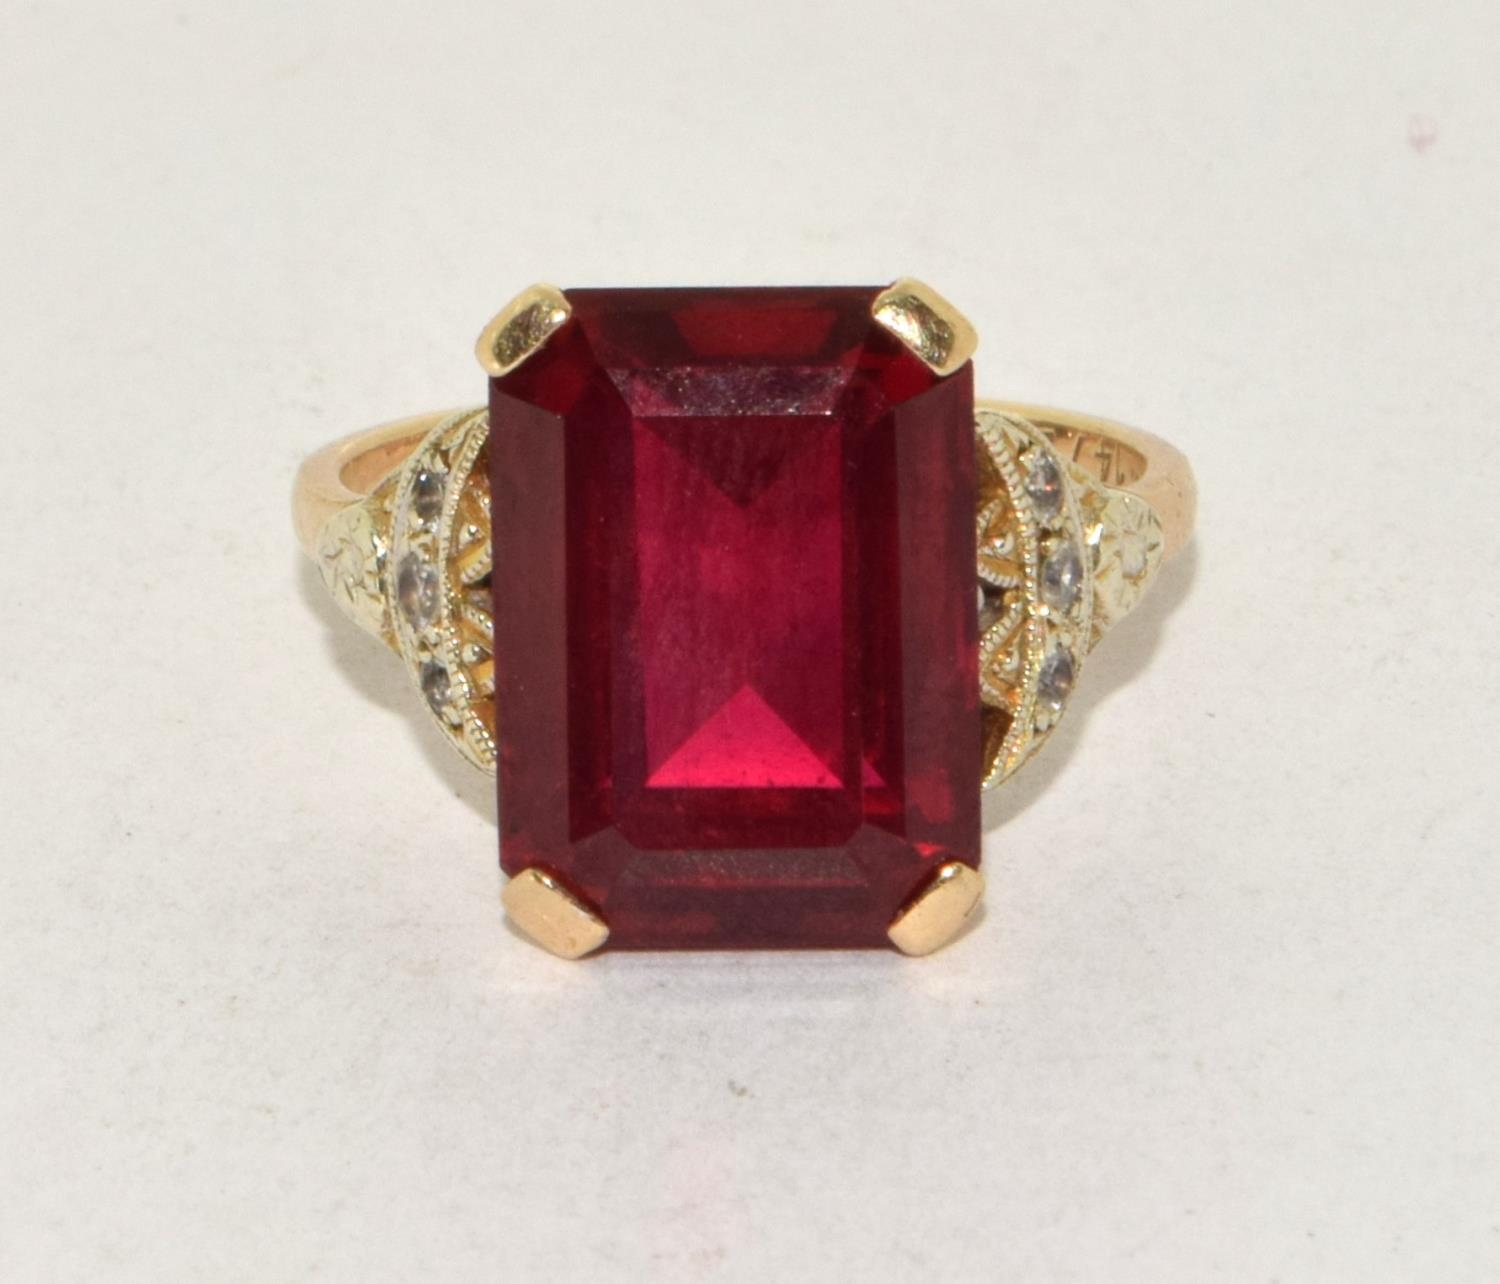 9ct gold ladies Large Ruby square set ring with diamonds to the shank set in an open work setting - Image 5 of 5